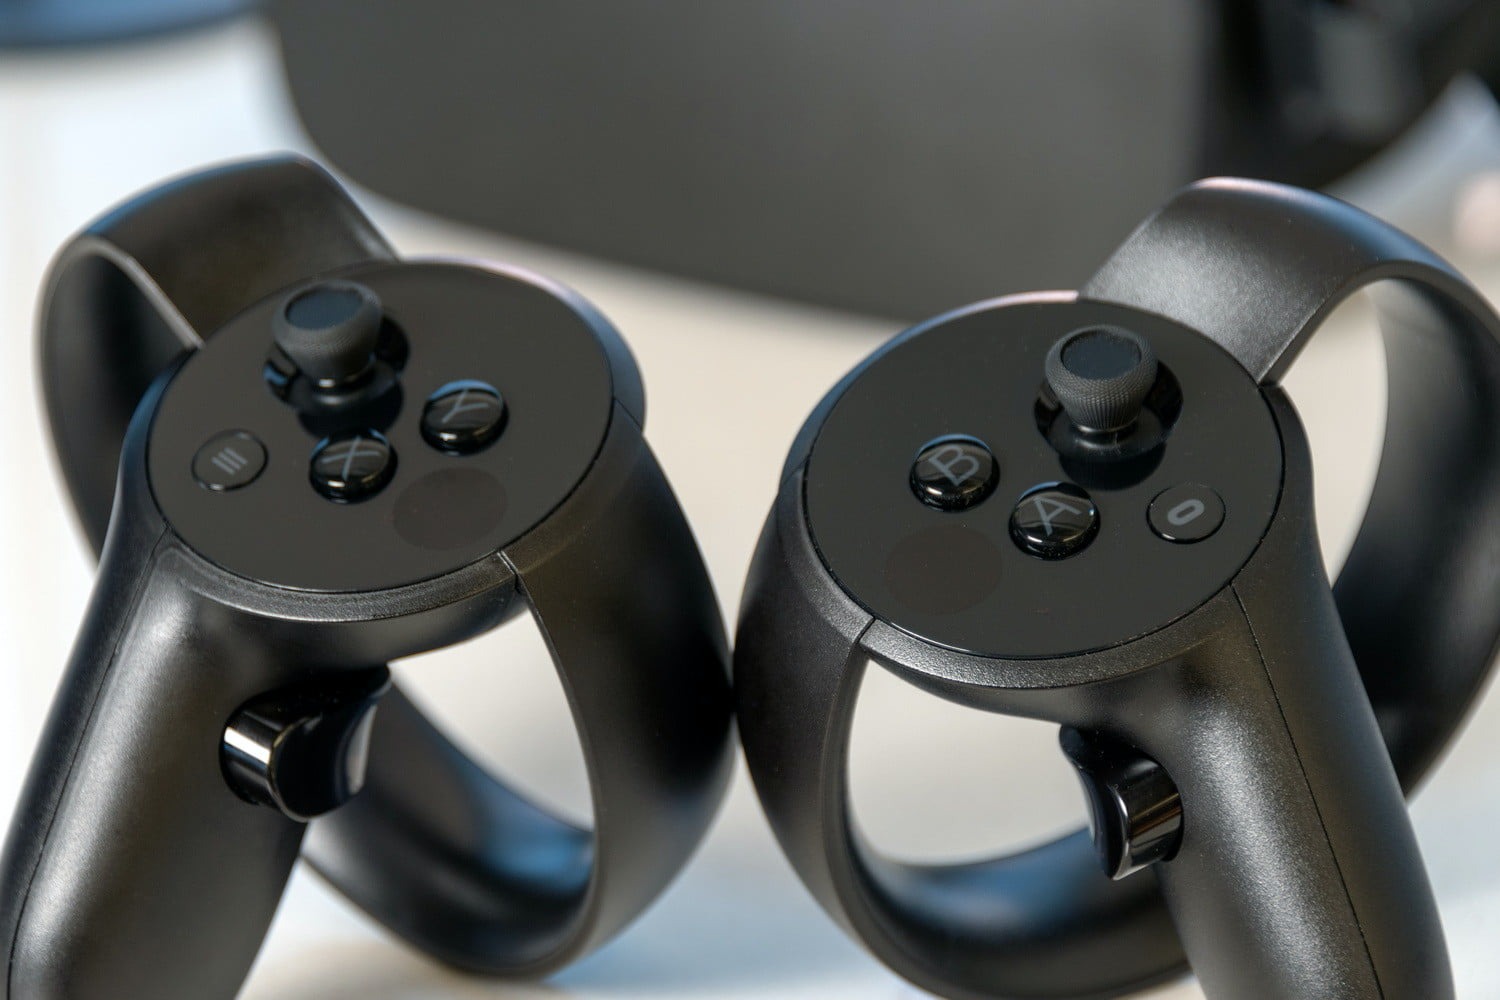 How To Turn Off Controller Vibration On Oculus Rift S Controllers